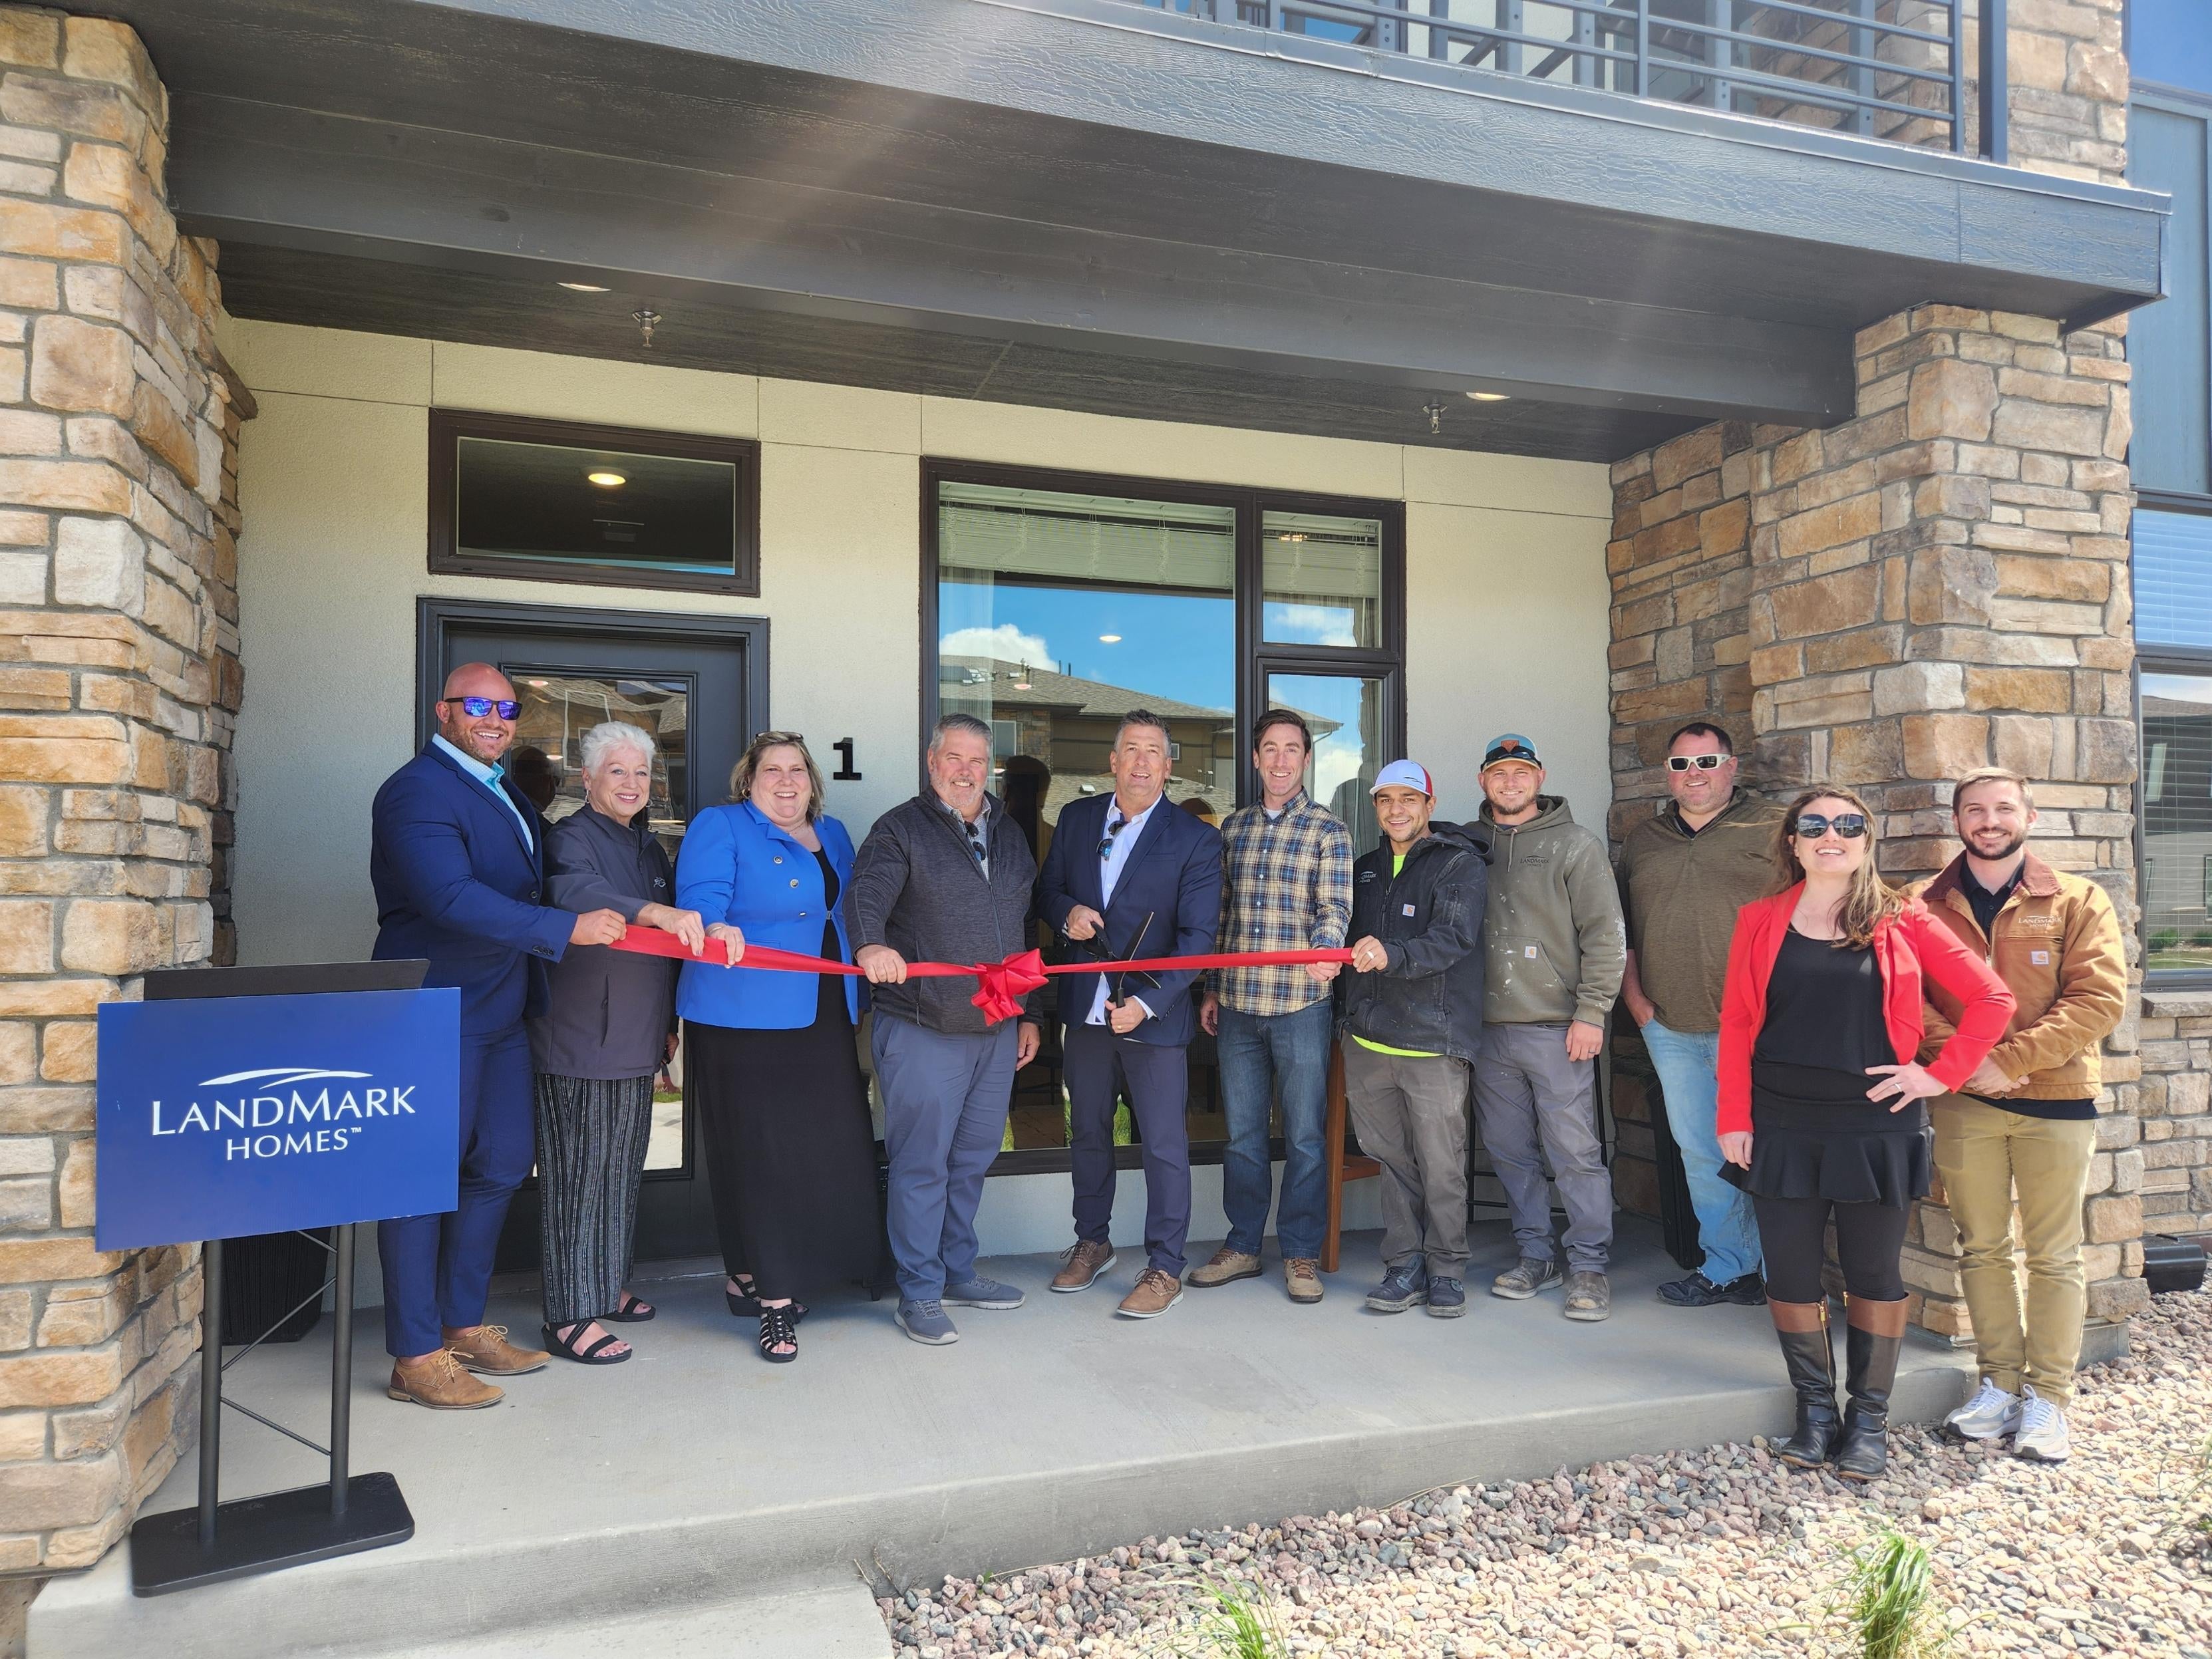 Northfield Ribbon Cutting Ceremony Marks A Milestone In Affordable And Sustainable Community Development in Fort Collins